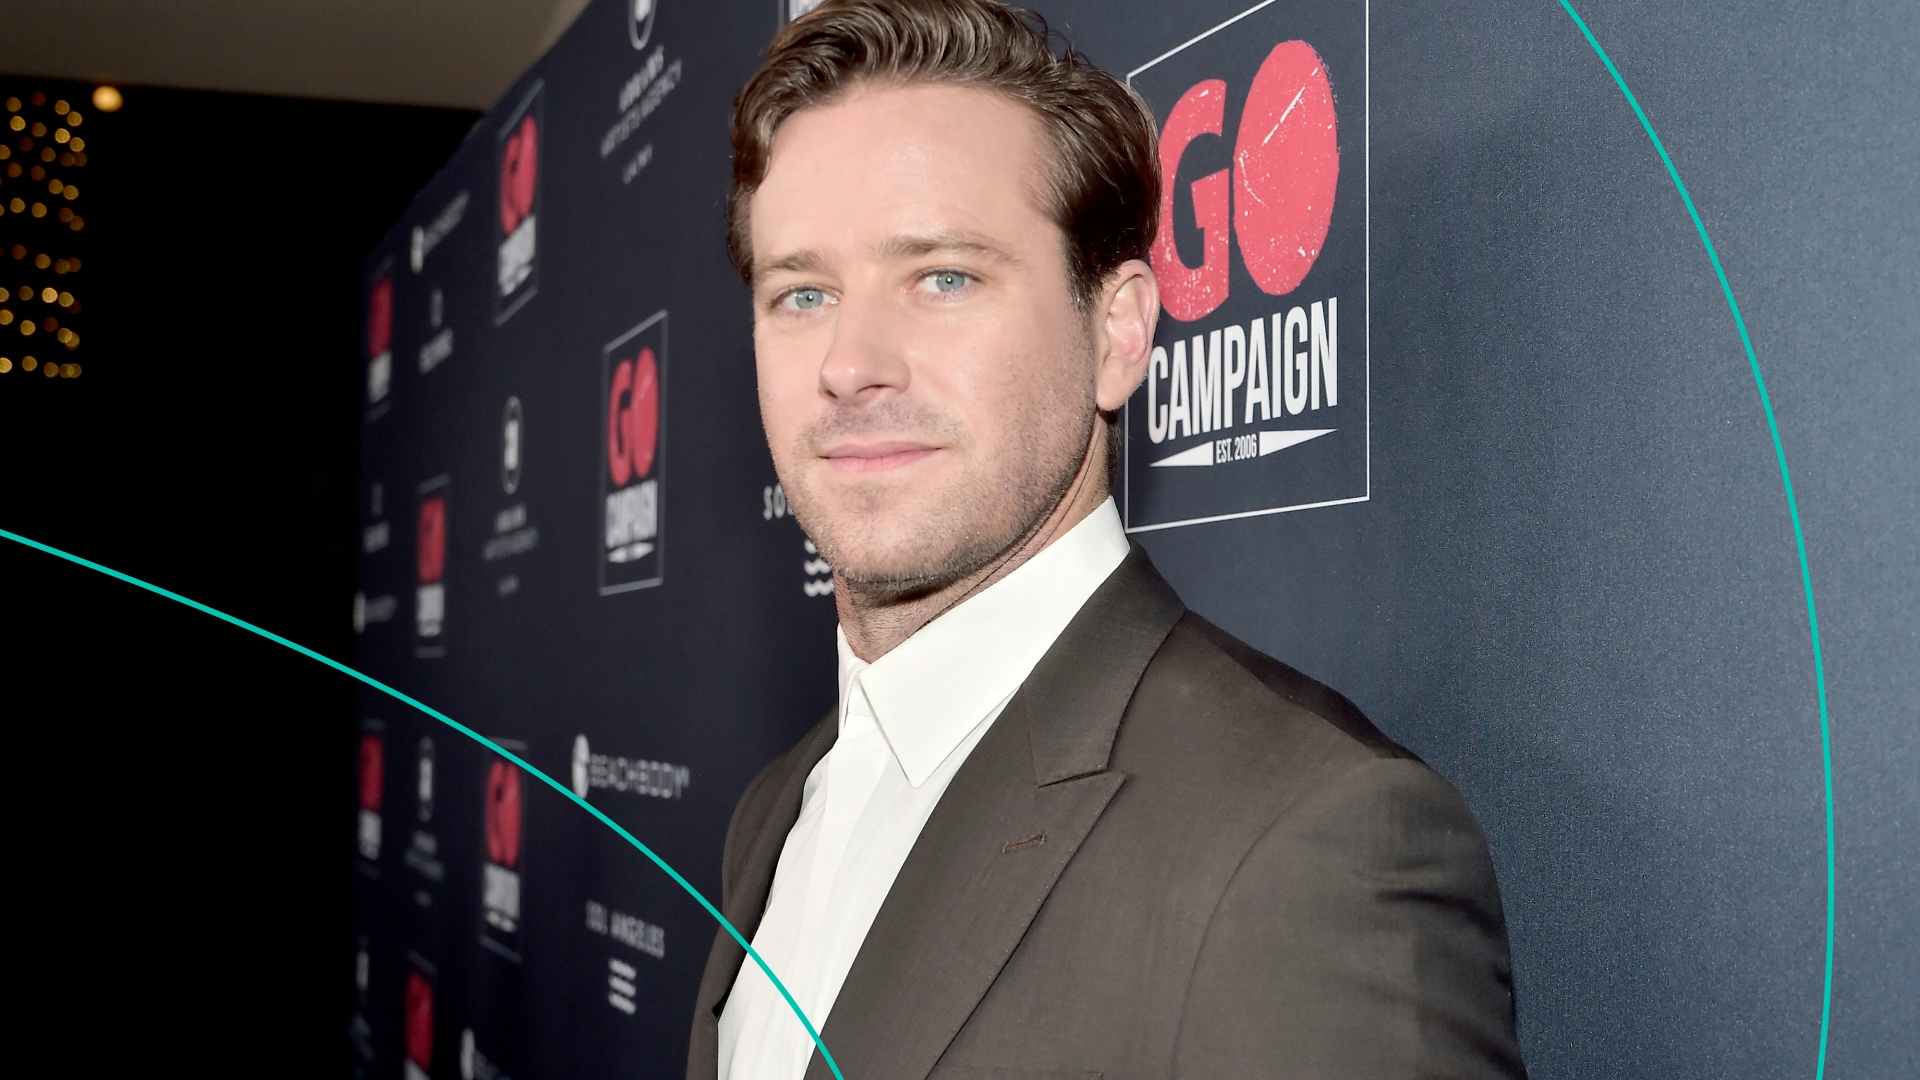 Armie Hammer attends the GO Campaign Gala 2019 on November 16, 2019